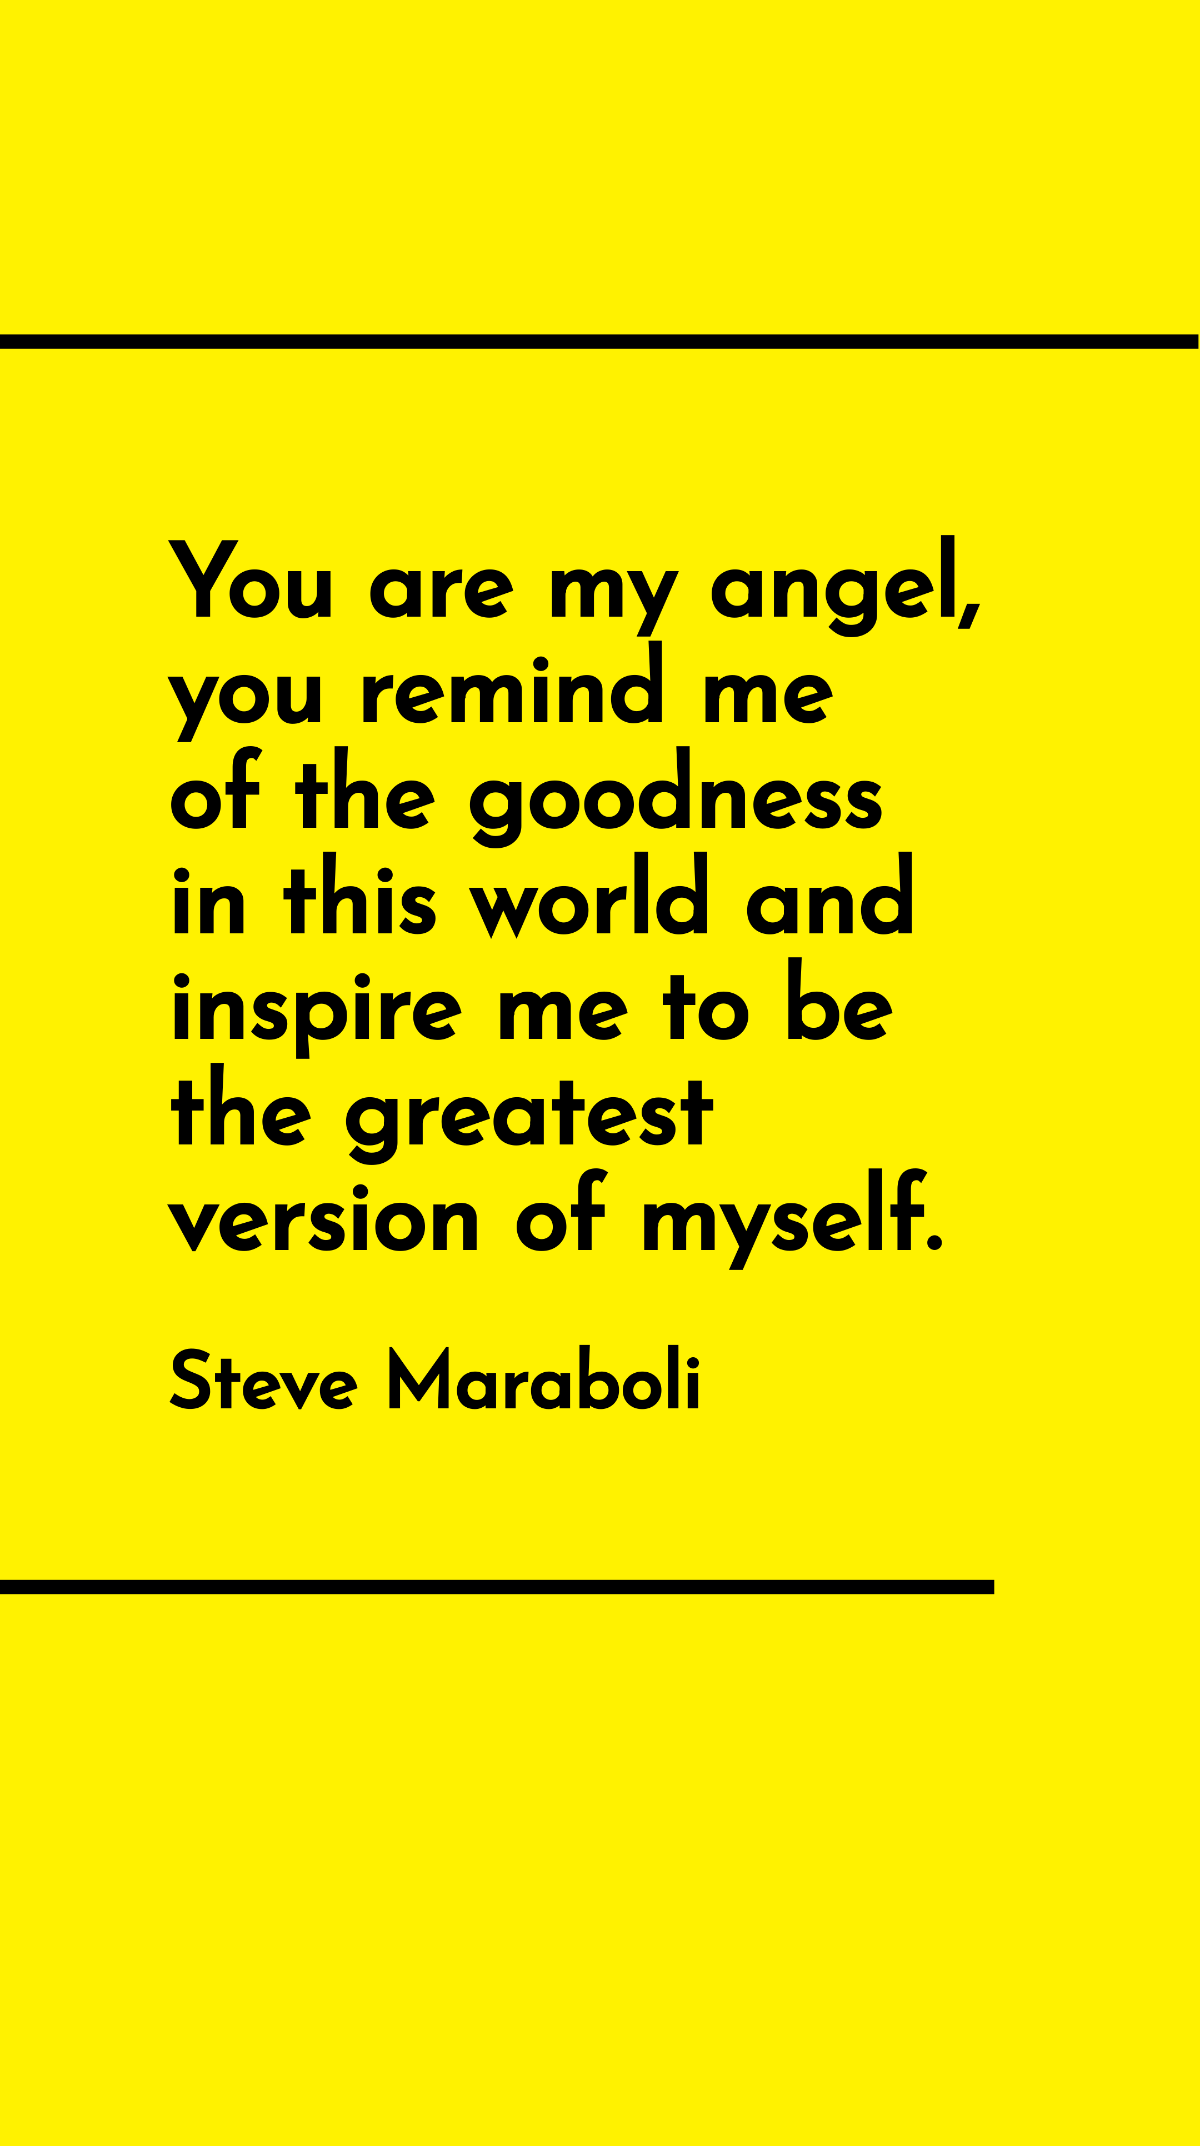 Steve Maraboli - You are my angel, you remind me of the goodness in this world and inspire me to be the greatest version of myself